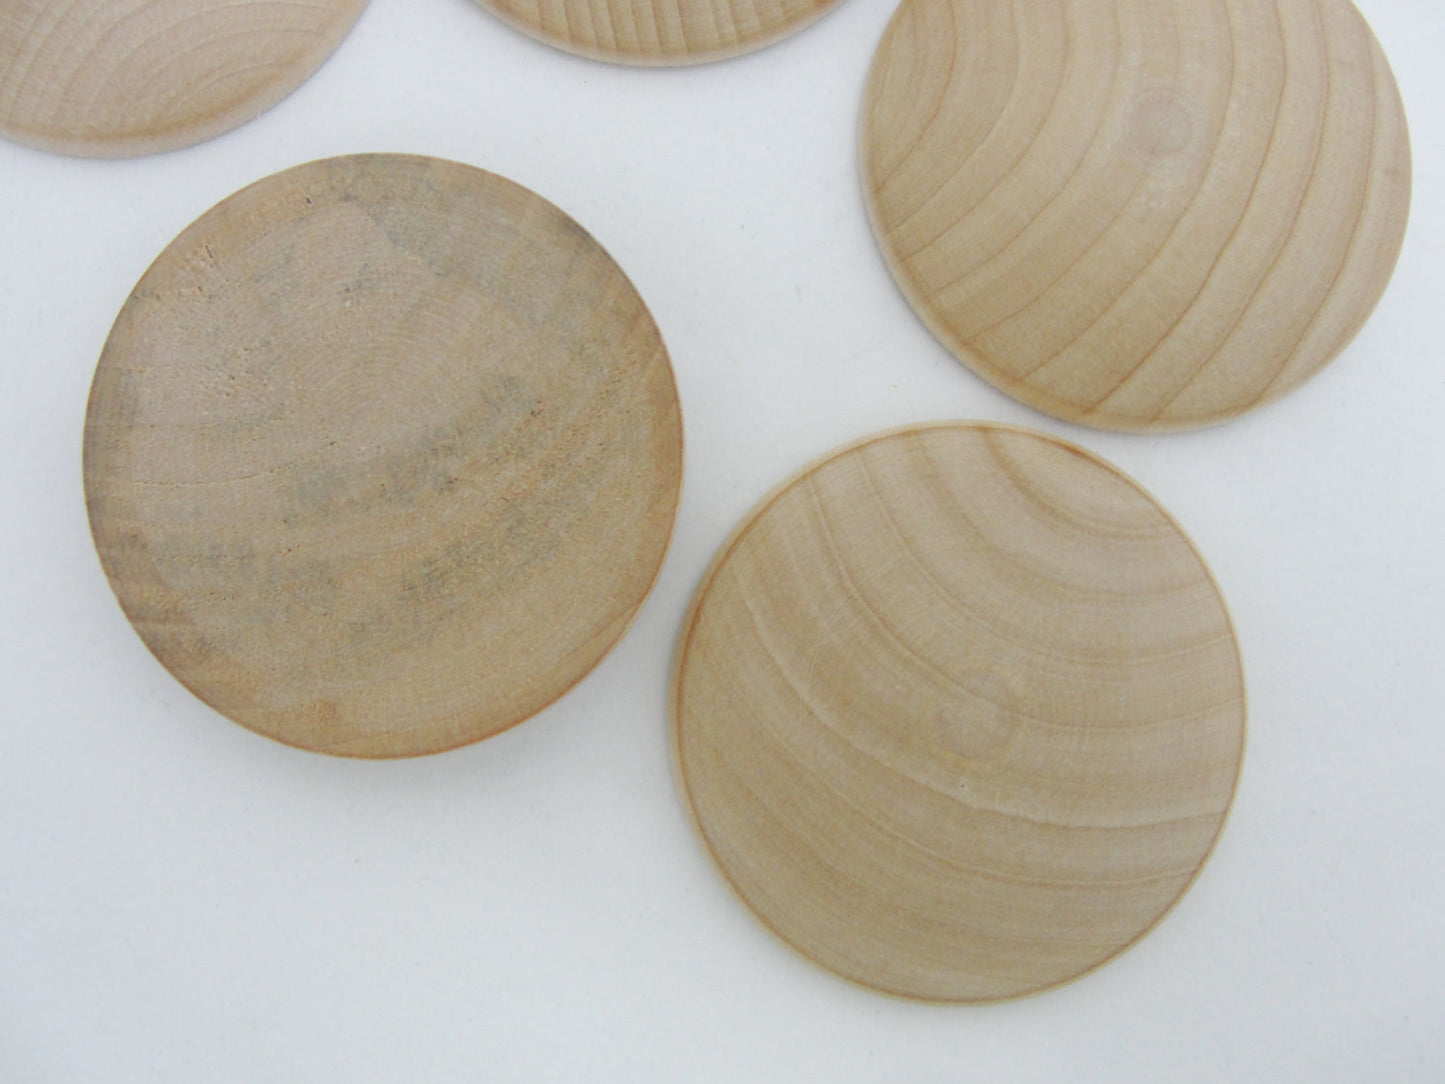 Domed wood disc 2" wide x 5/16" thick set of 12 - Wood parts - Craft Supply House